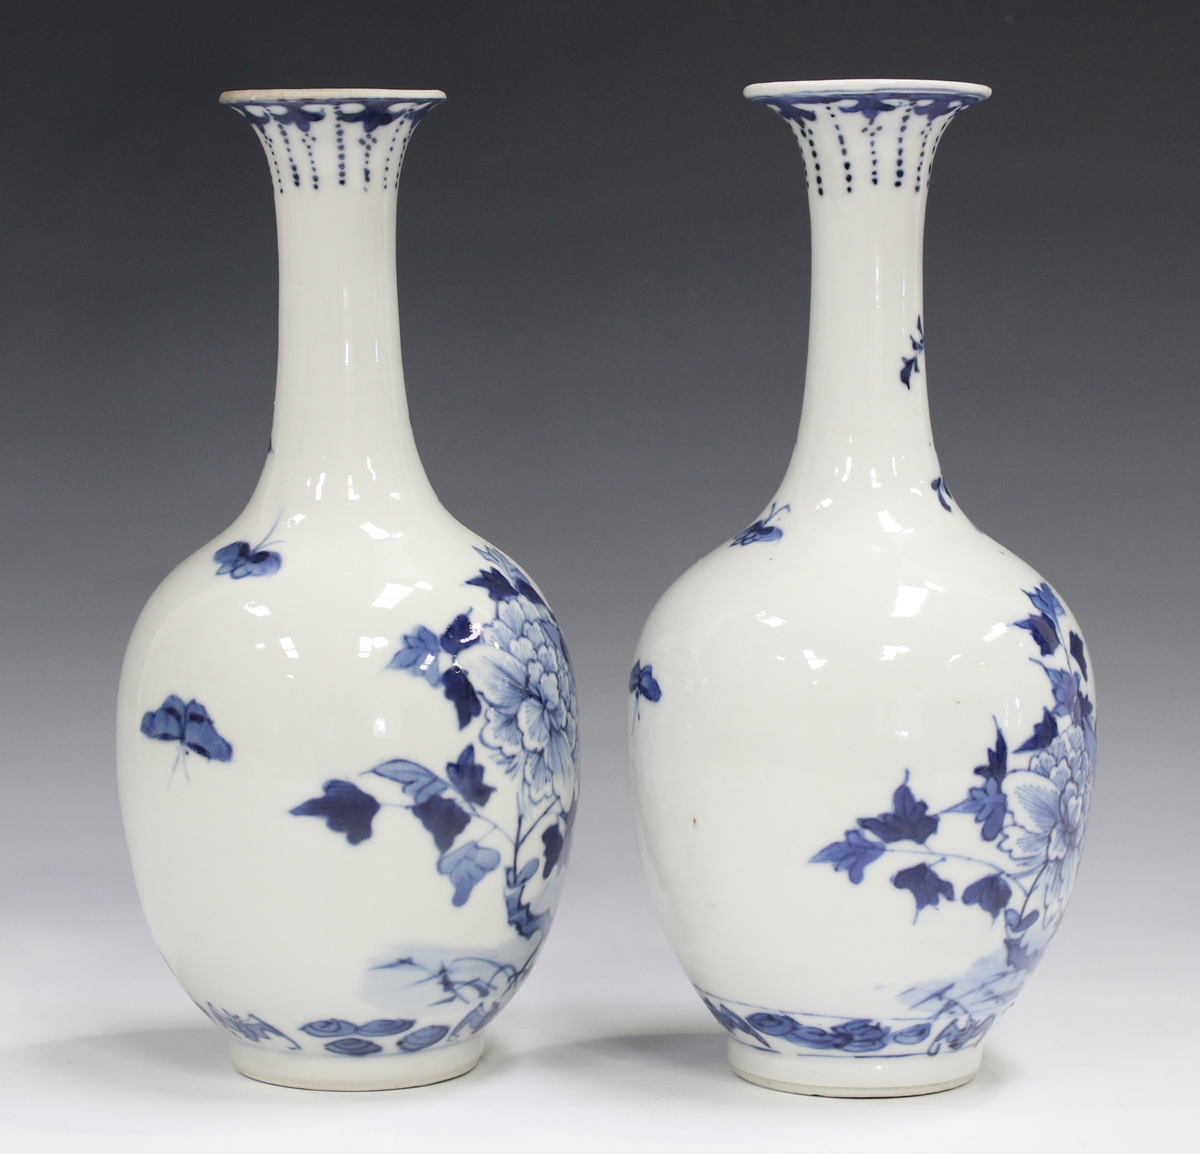 A pair of Chinese blue and white porcelain bottle vases, late 19th century, each ovoid body and - Image 12 of 13